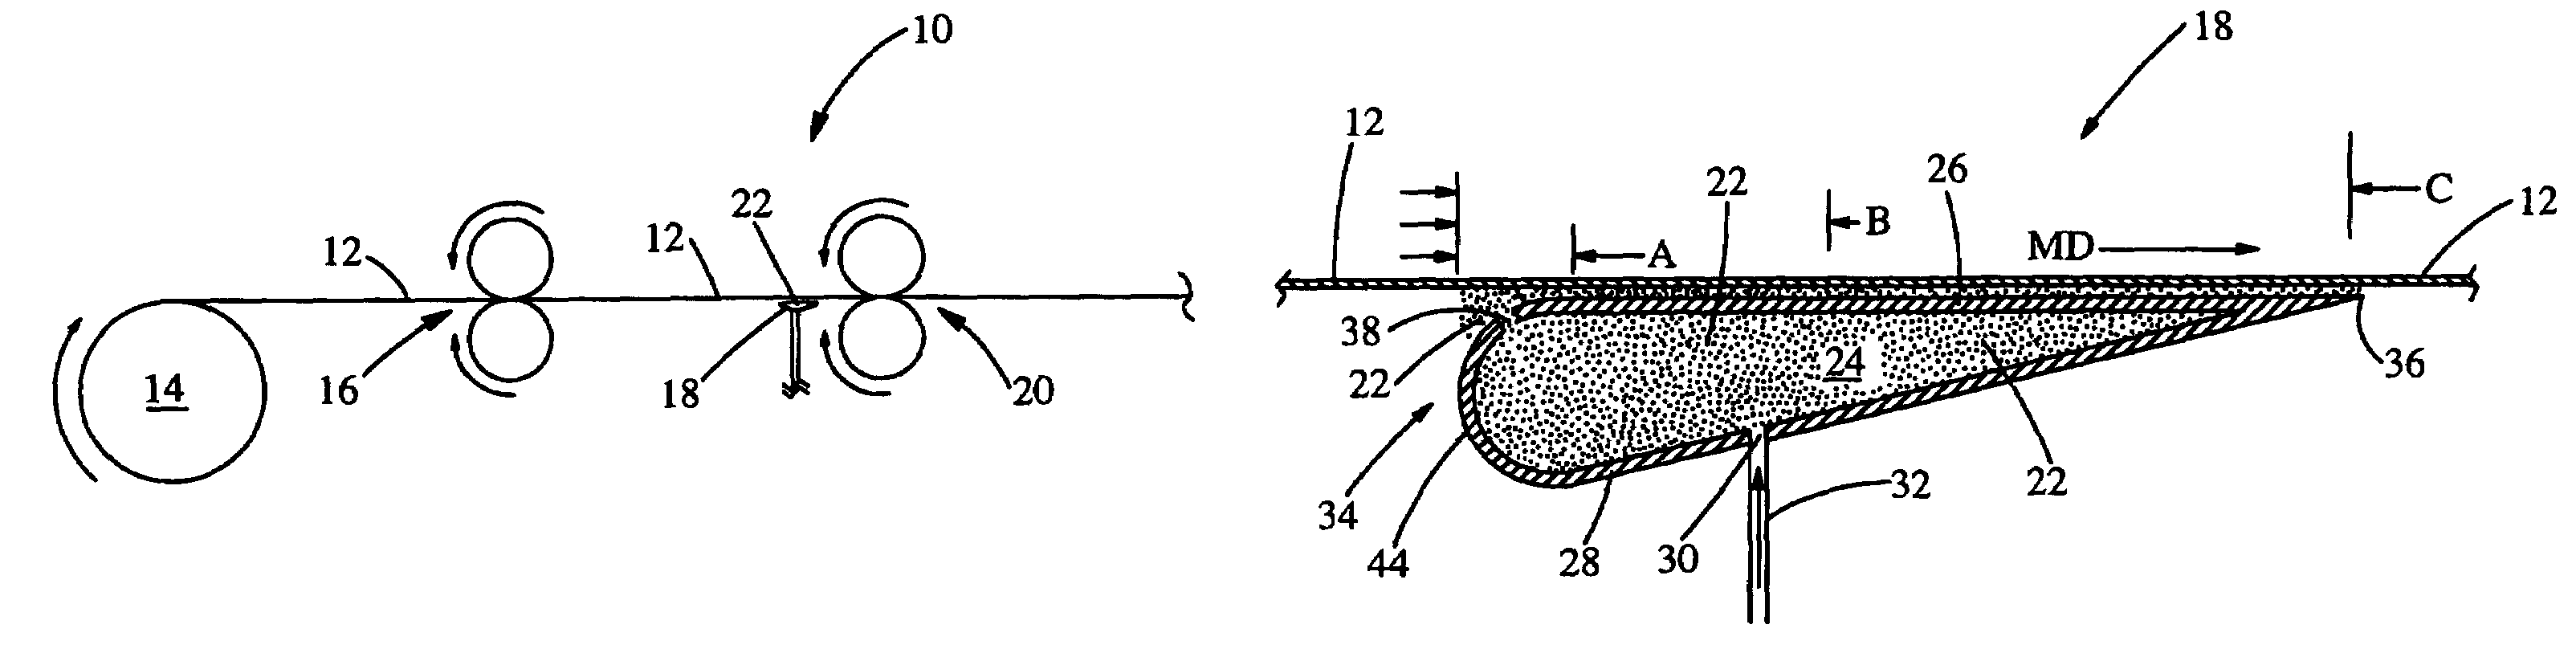 Web handling apparatus and process for providing steam to a web material